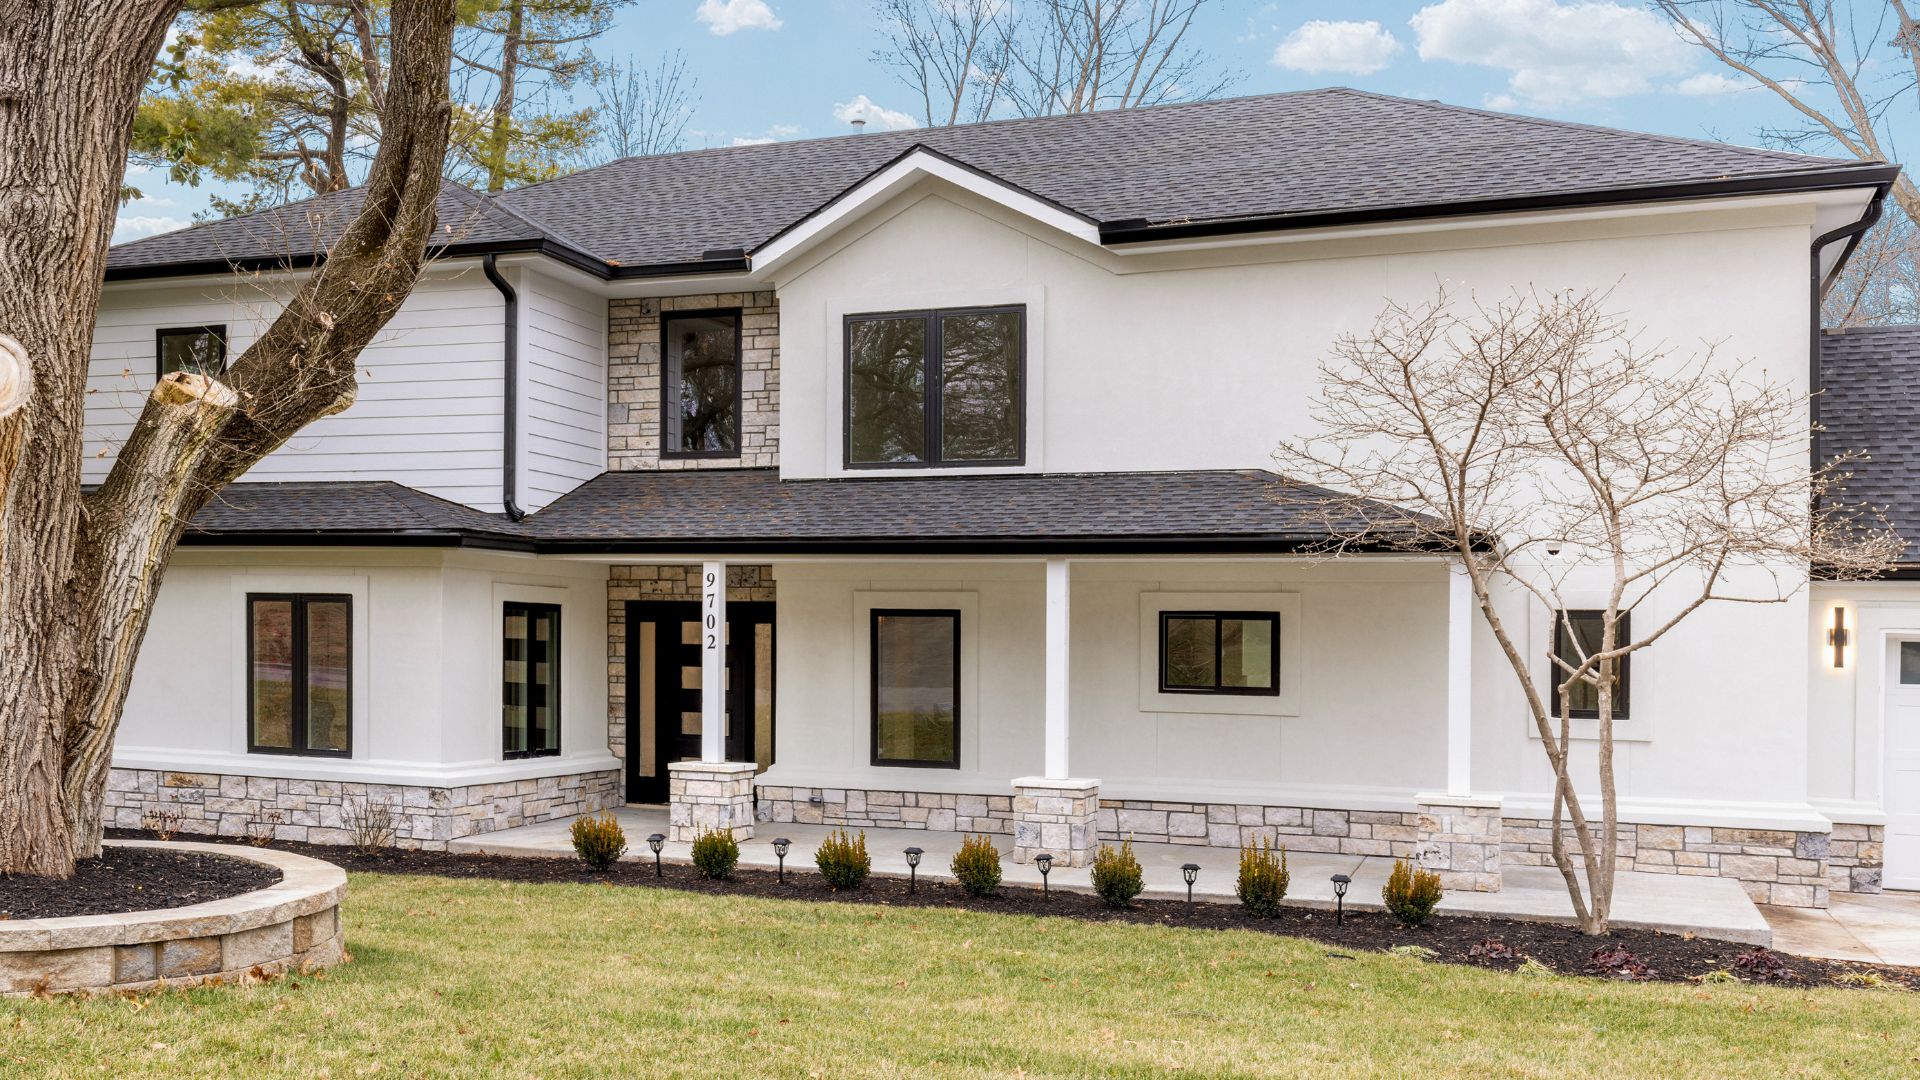 Front of remodeled home with white paint, stone and black roof.